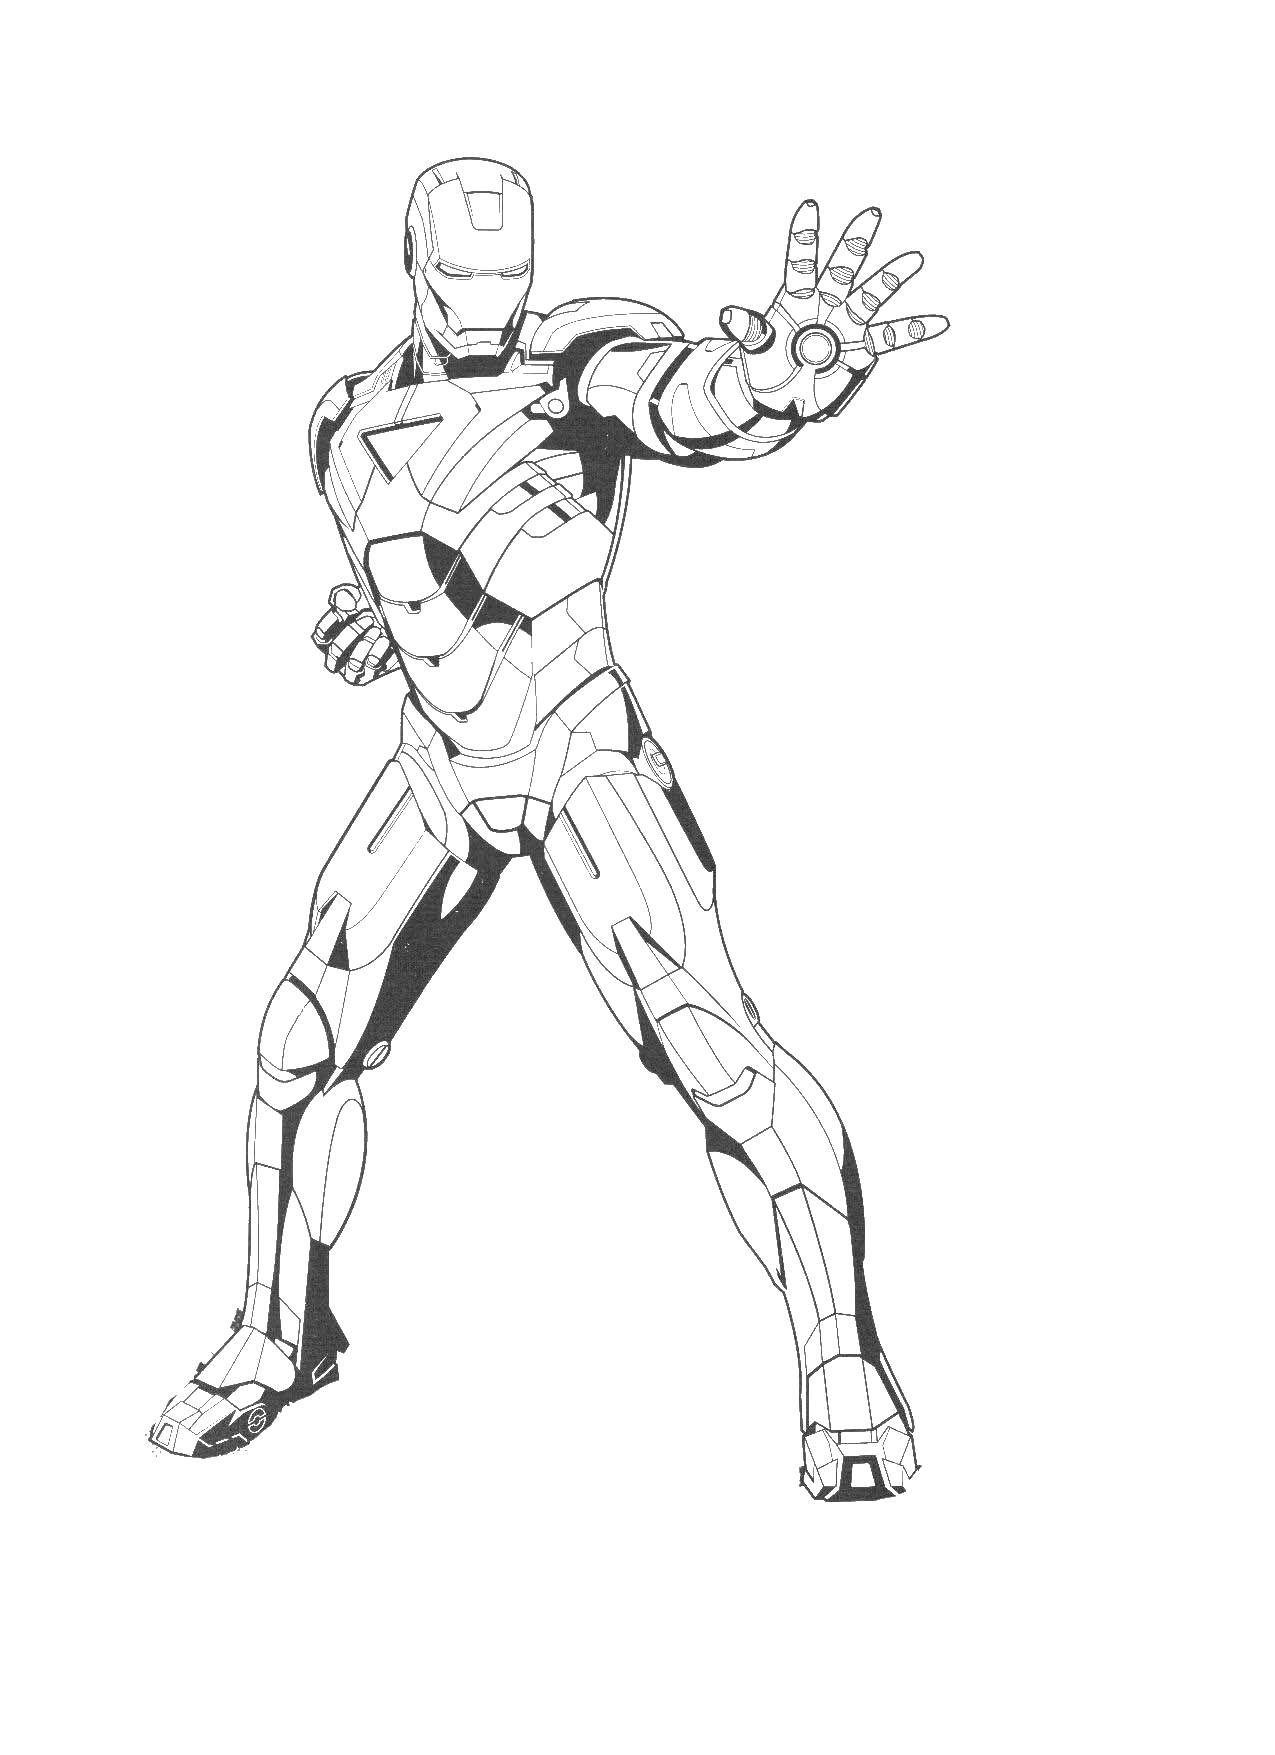 Coloring Iron man in front. Category iron man. Tags:  iron man suit Avengers.